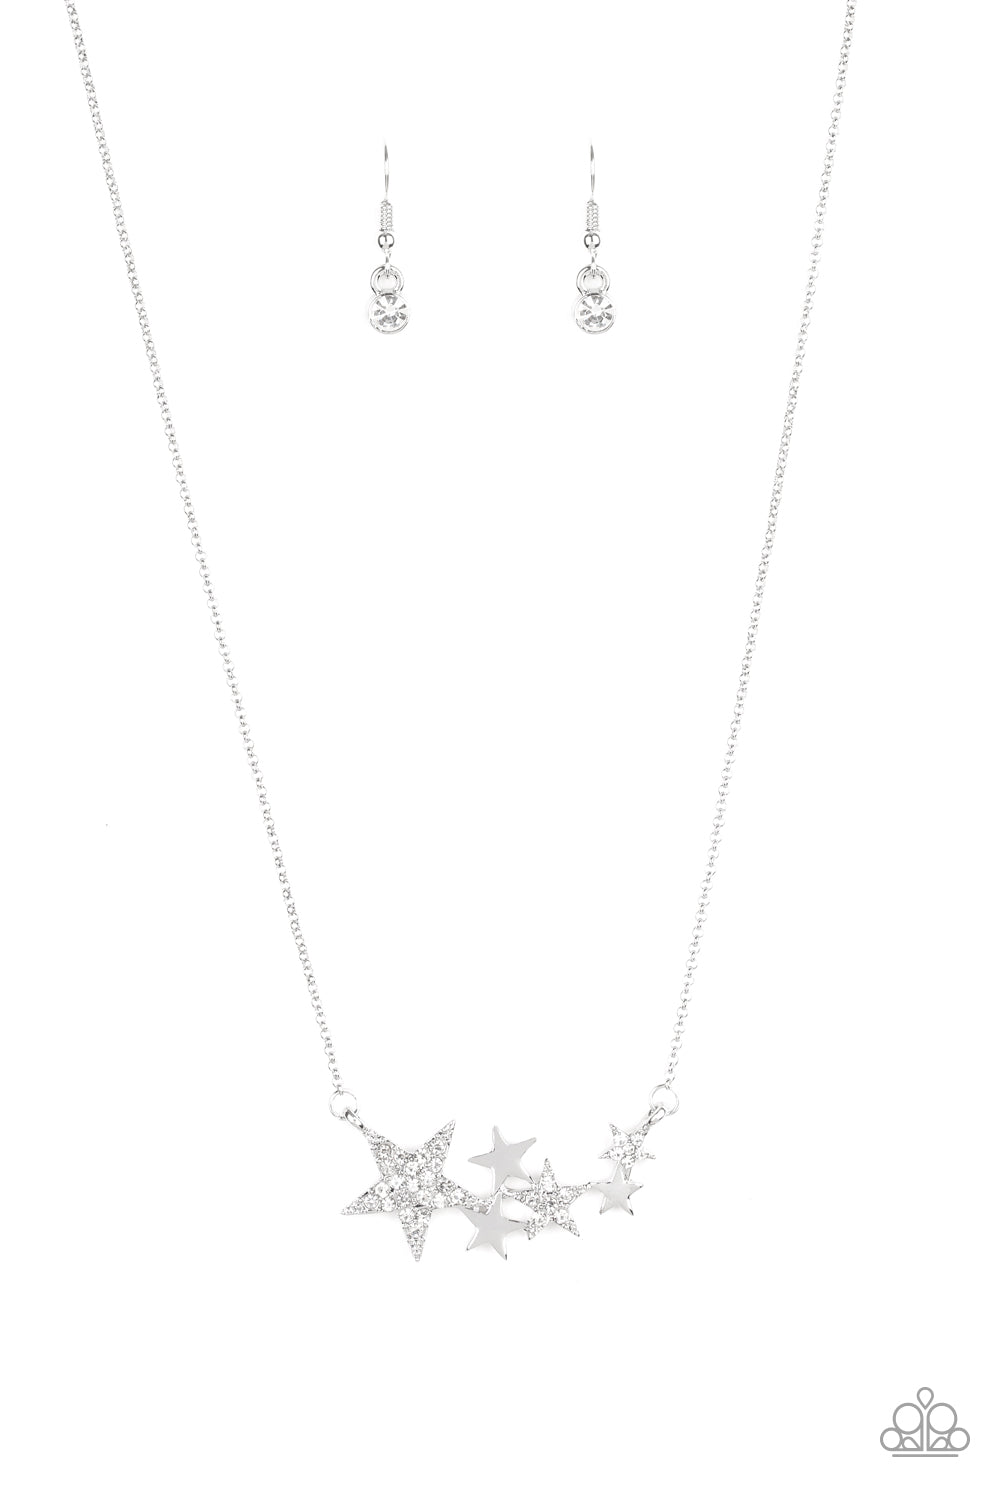 Rising Starlet - White - Necklace - Paparazzi Accessories